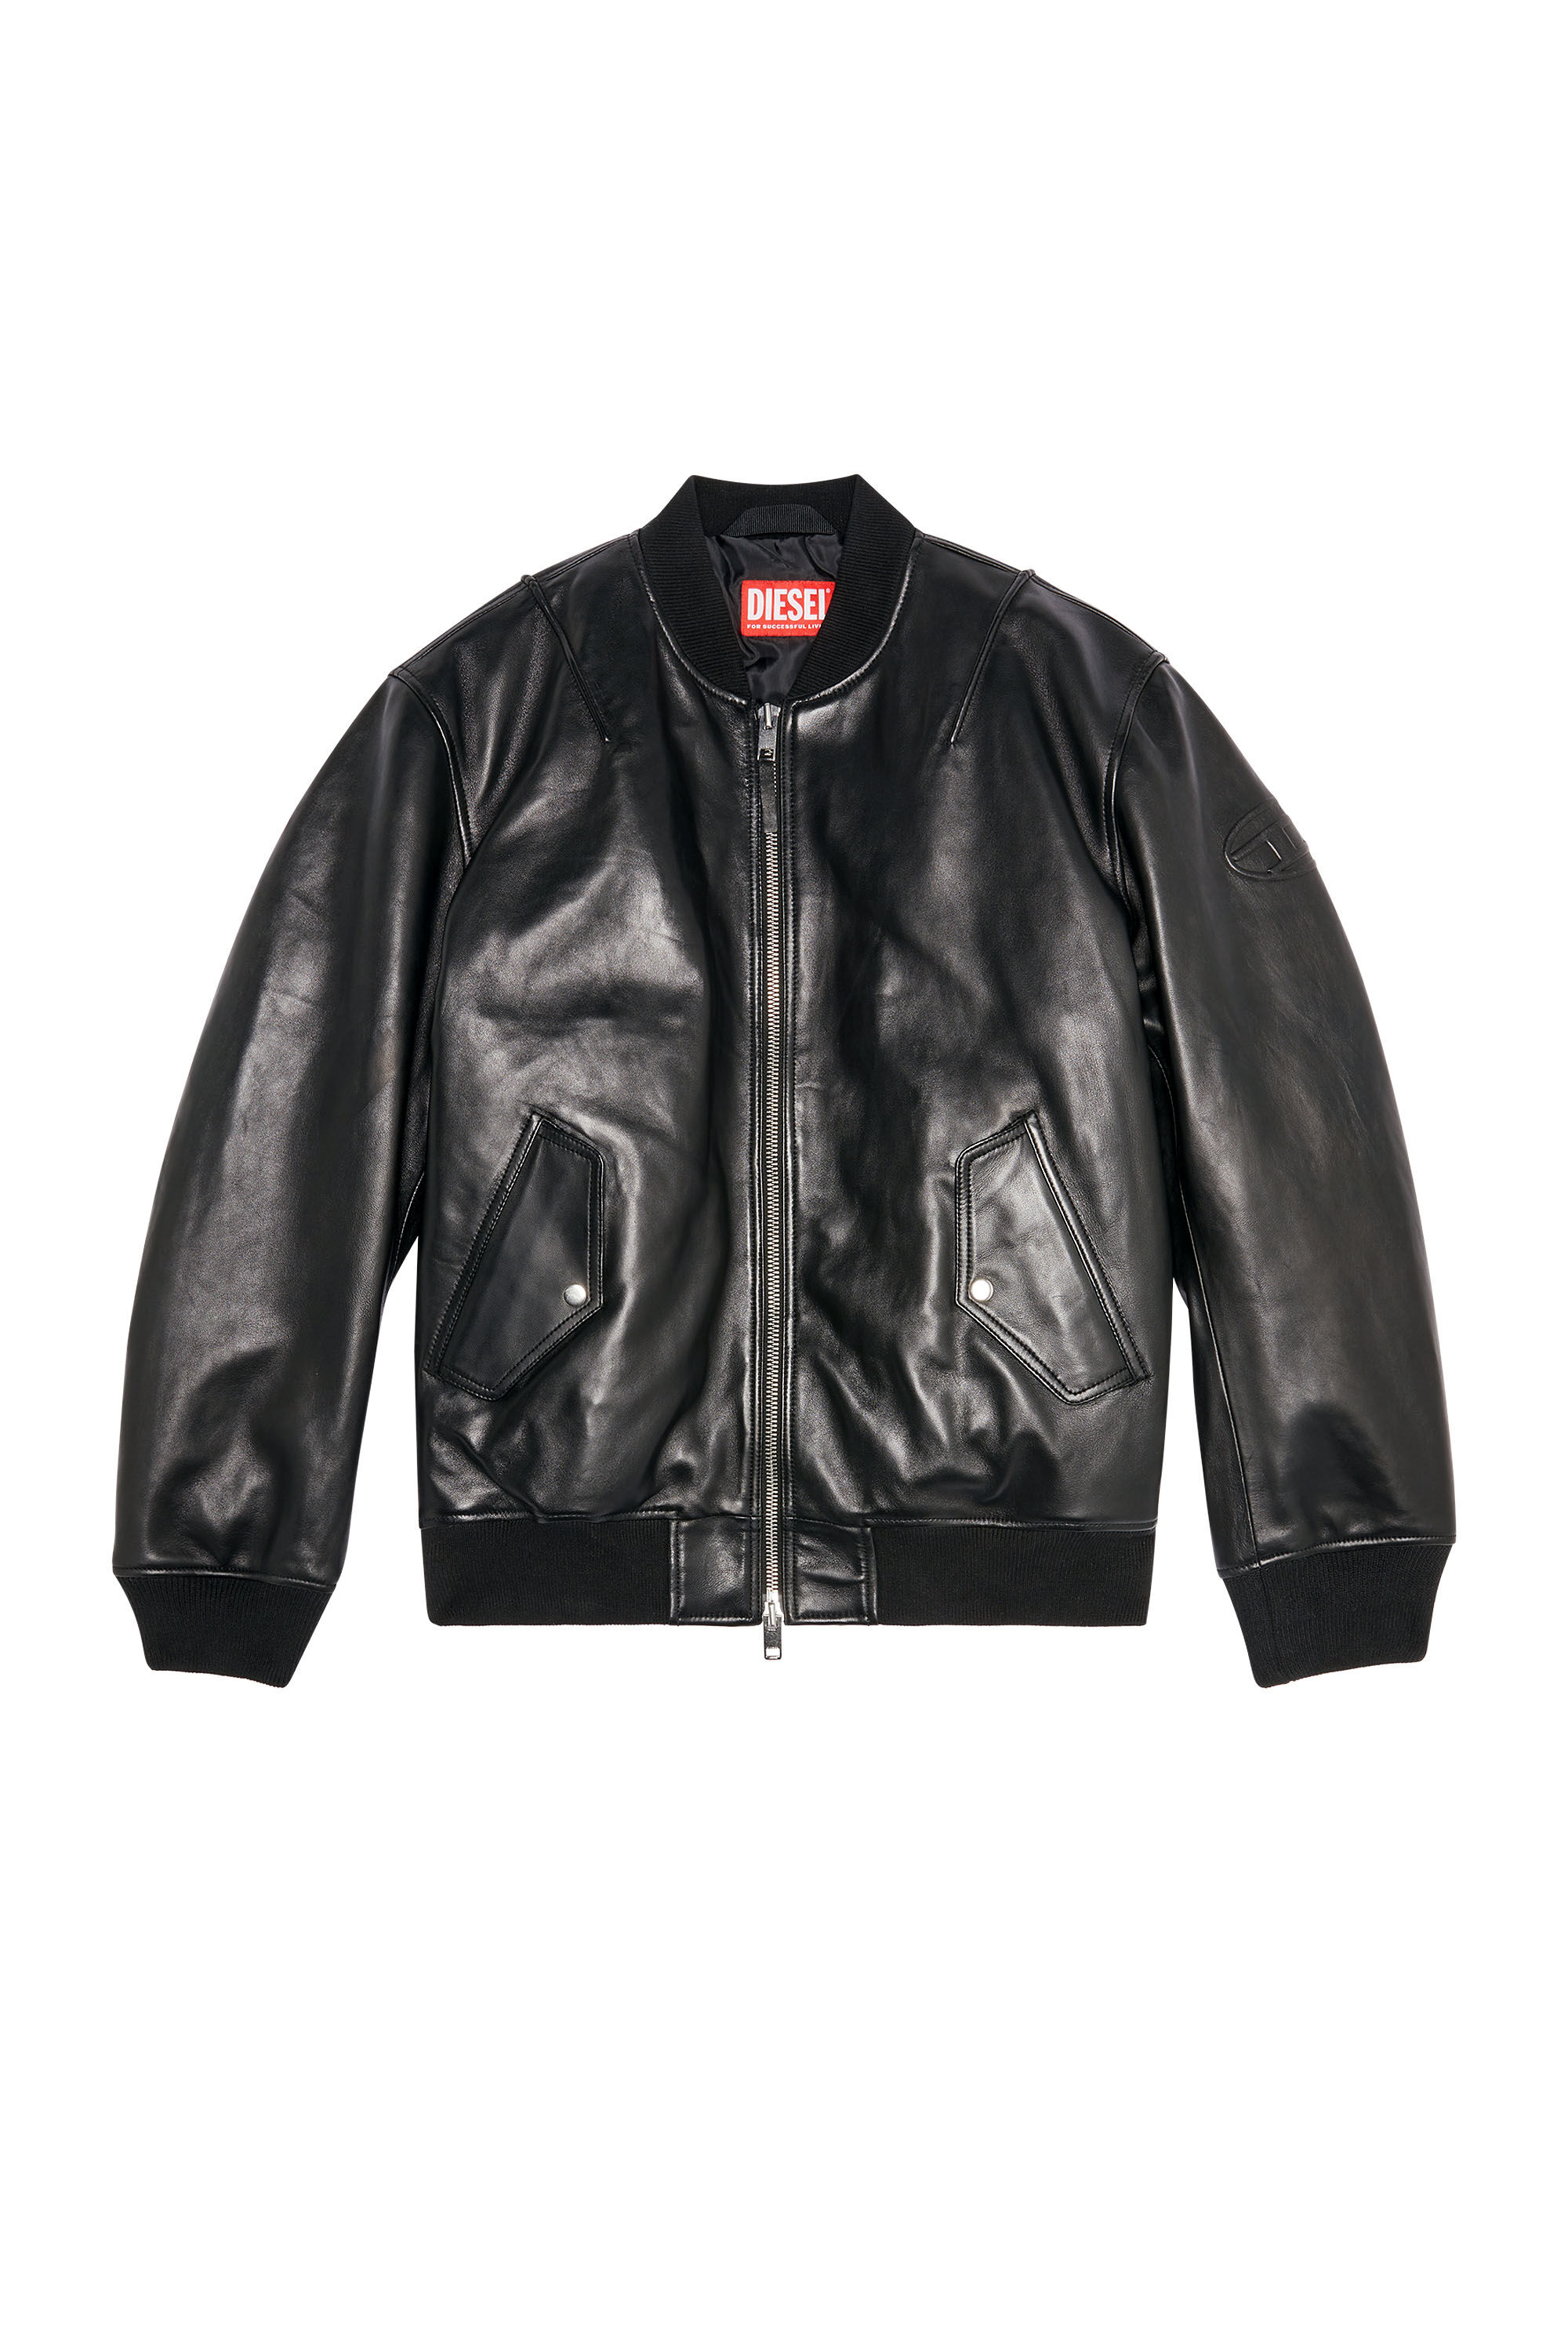 Diesel - L-PRITTS, Man Padded jacket in tumbled leather in Black - Image 2